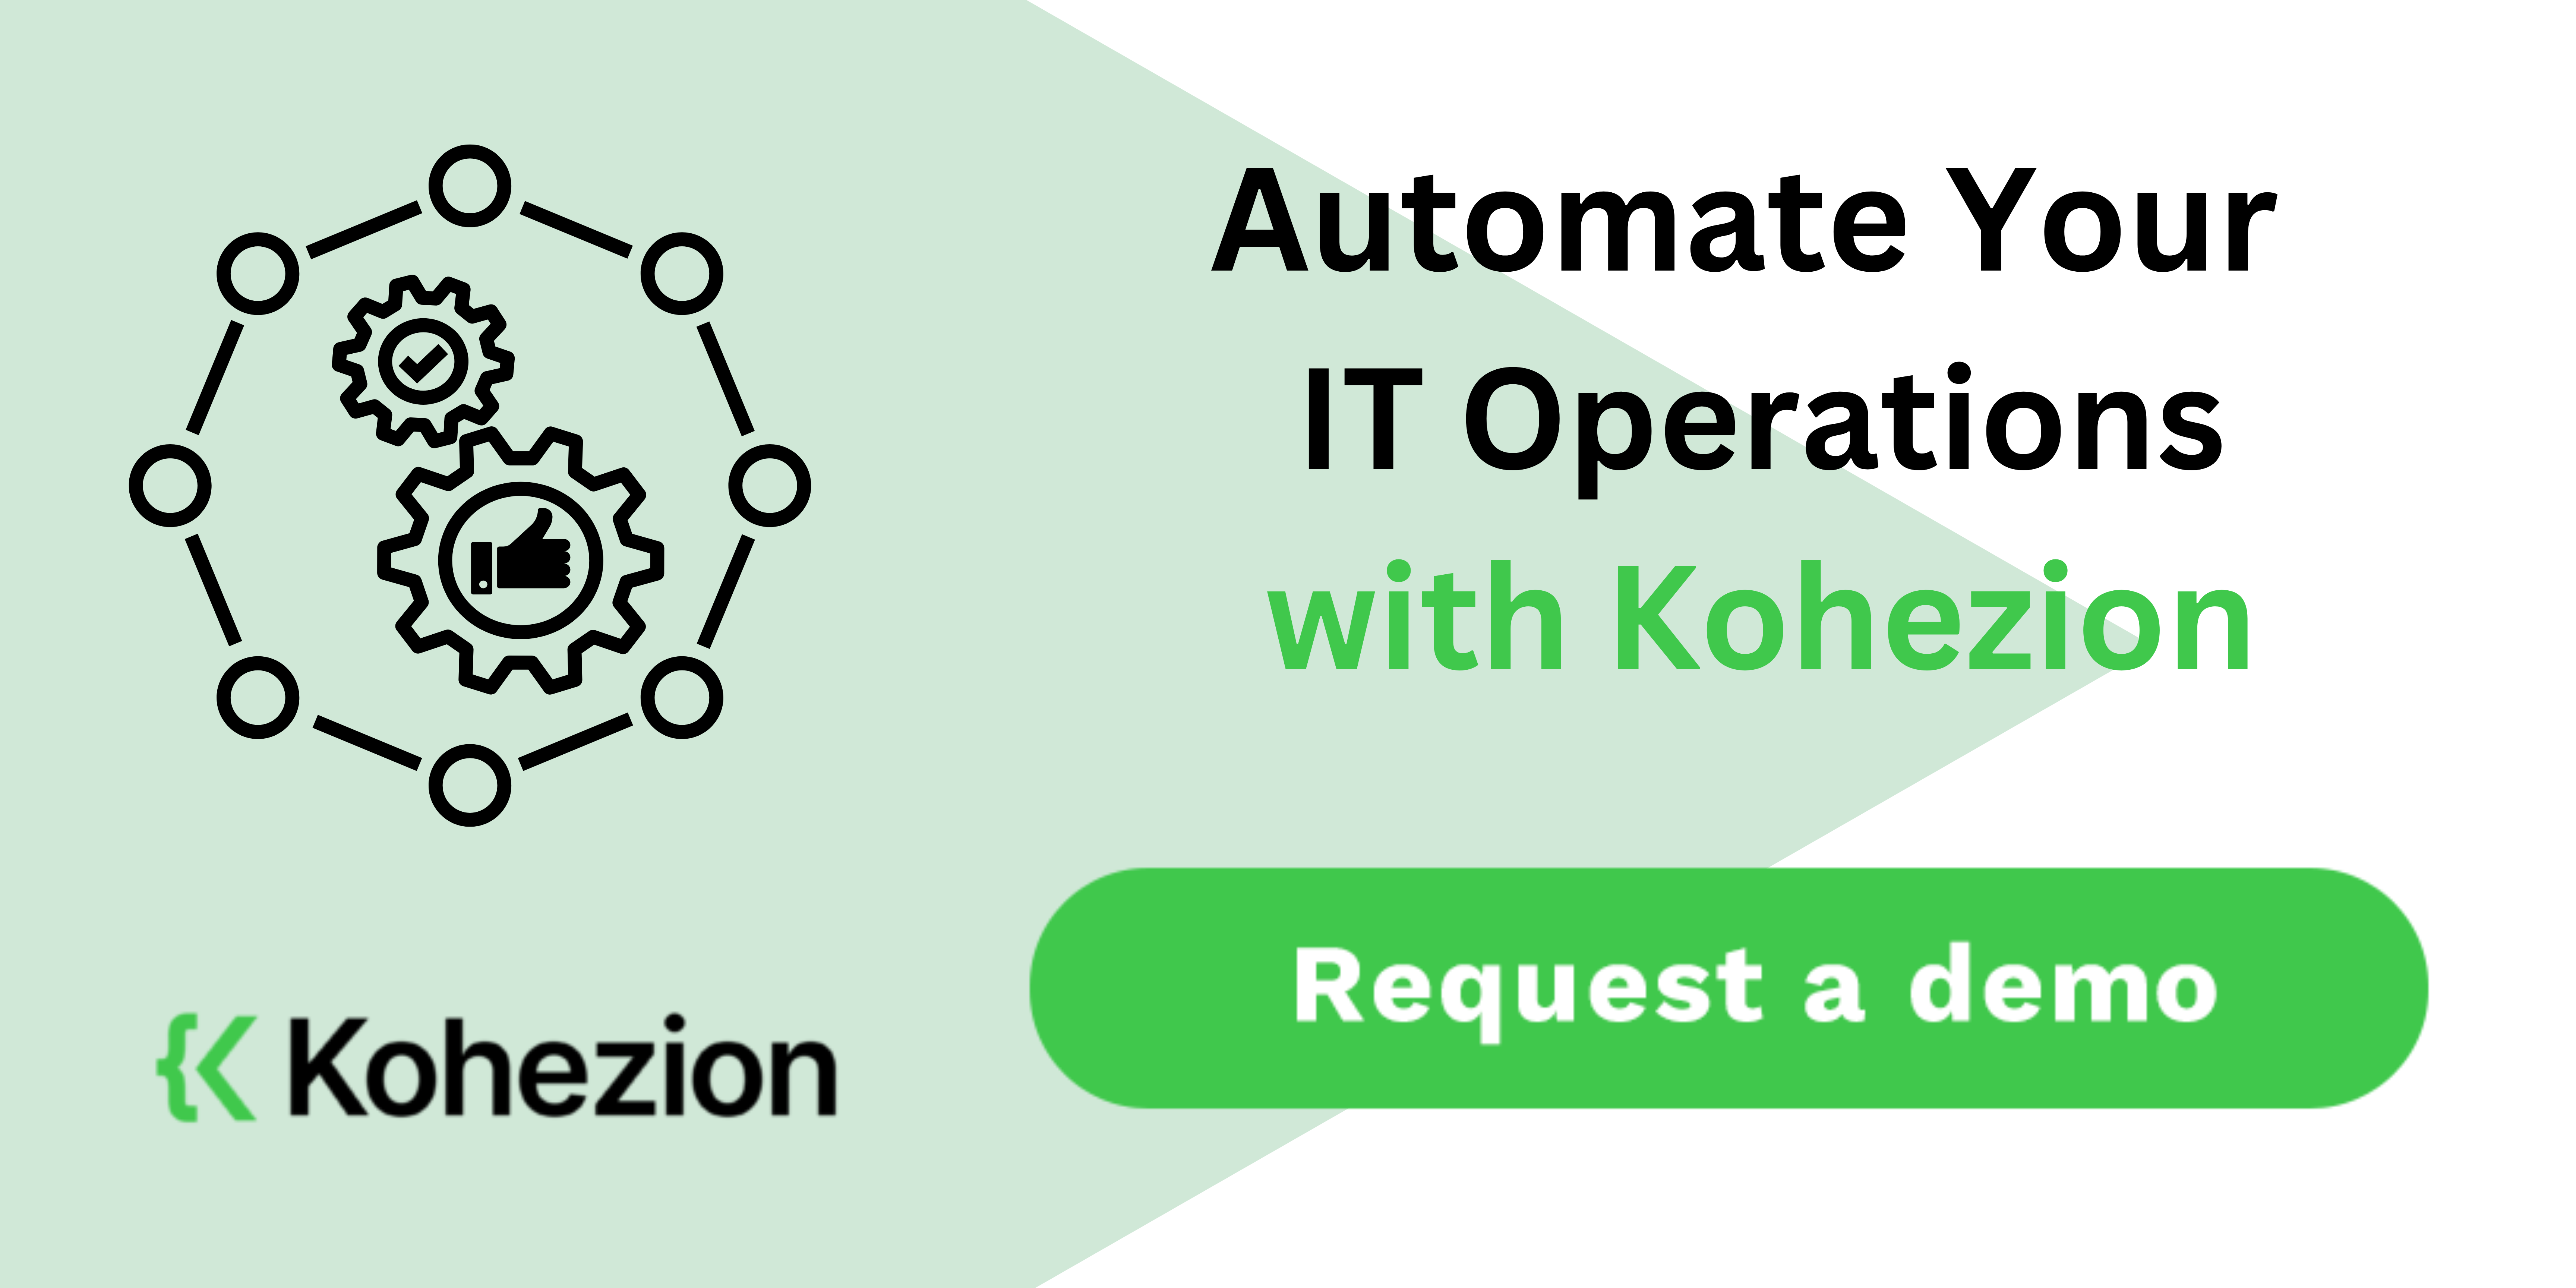 automate your it operations with kohezion